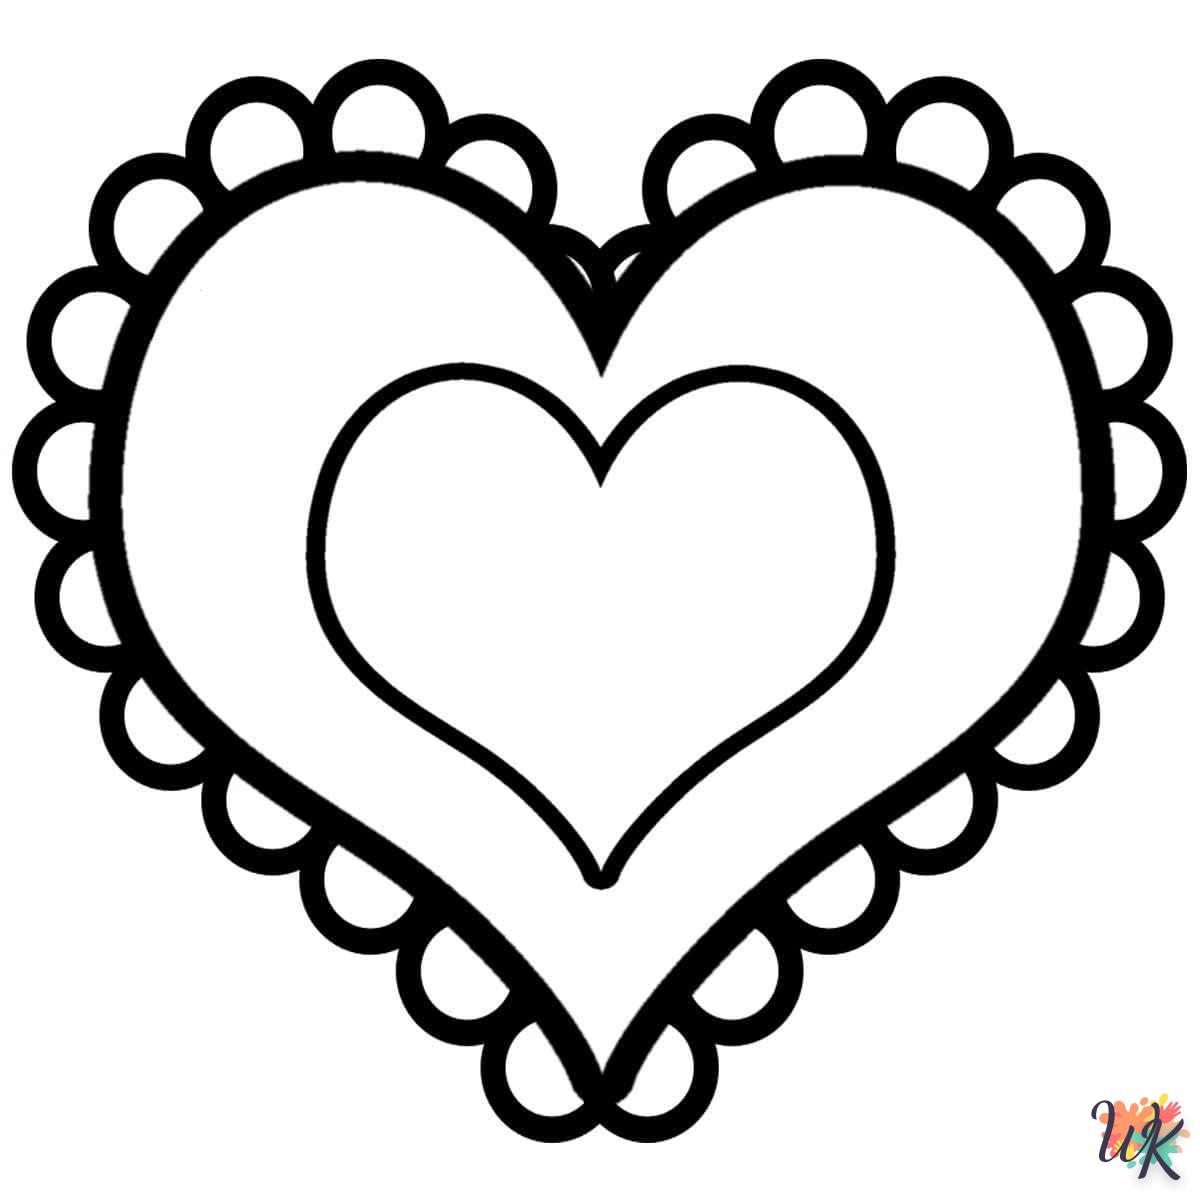 Heart coloring page to print